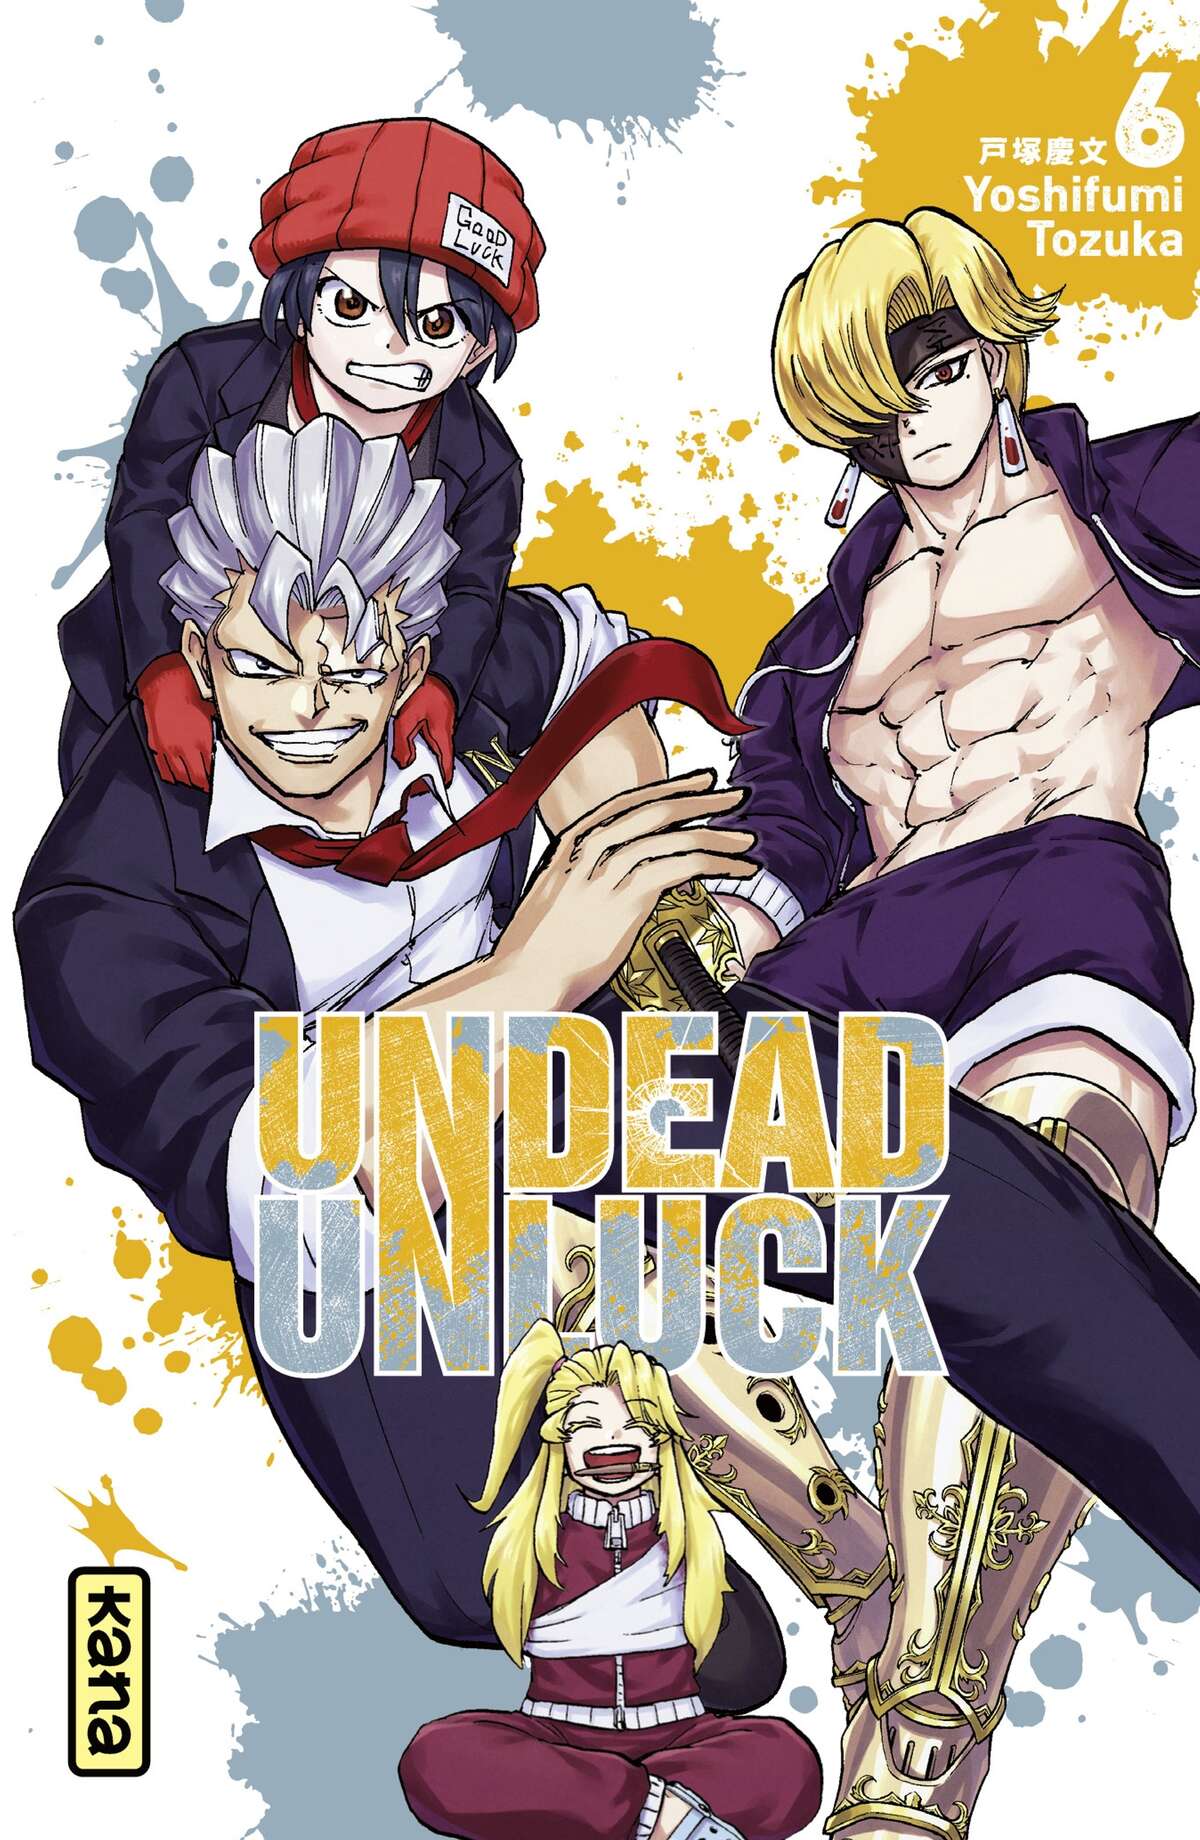 Undead Unluck Volume 6 page 1